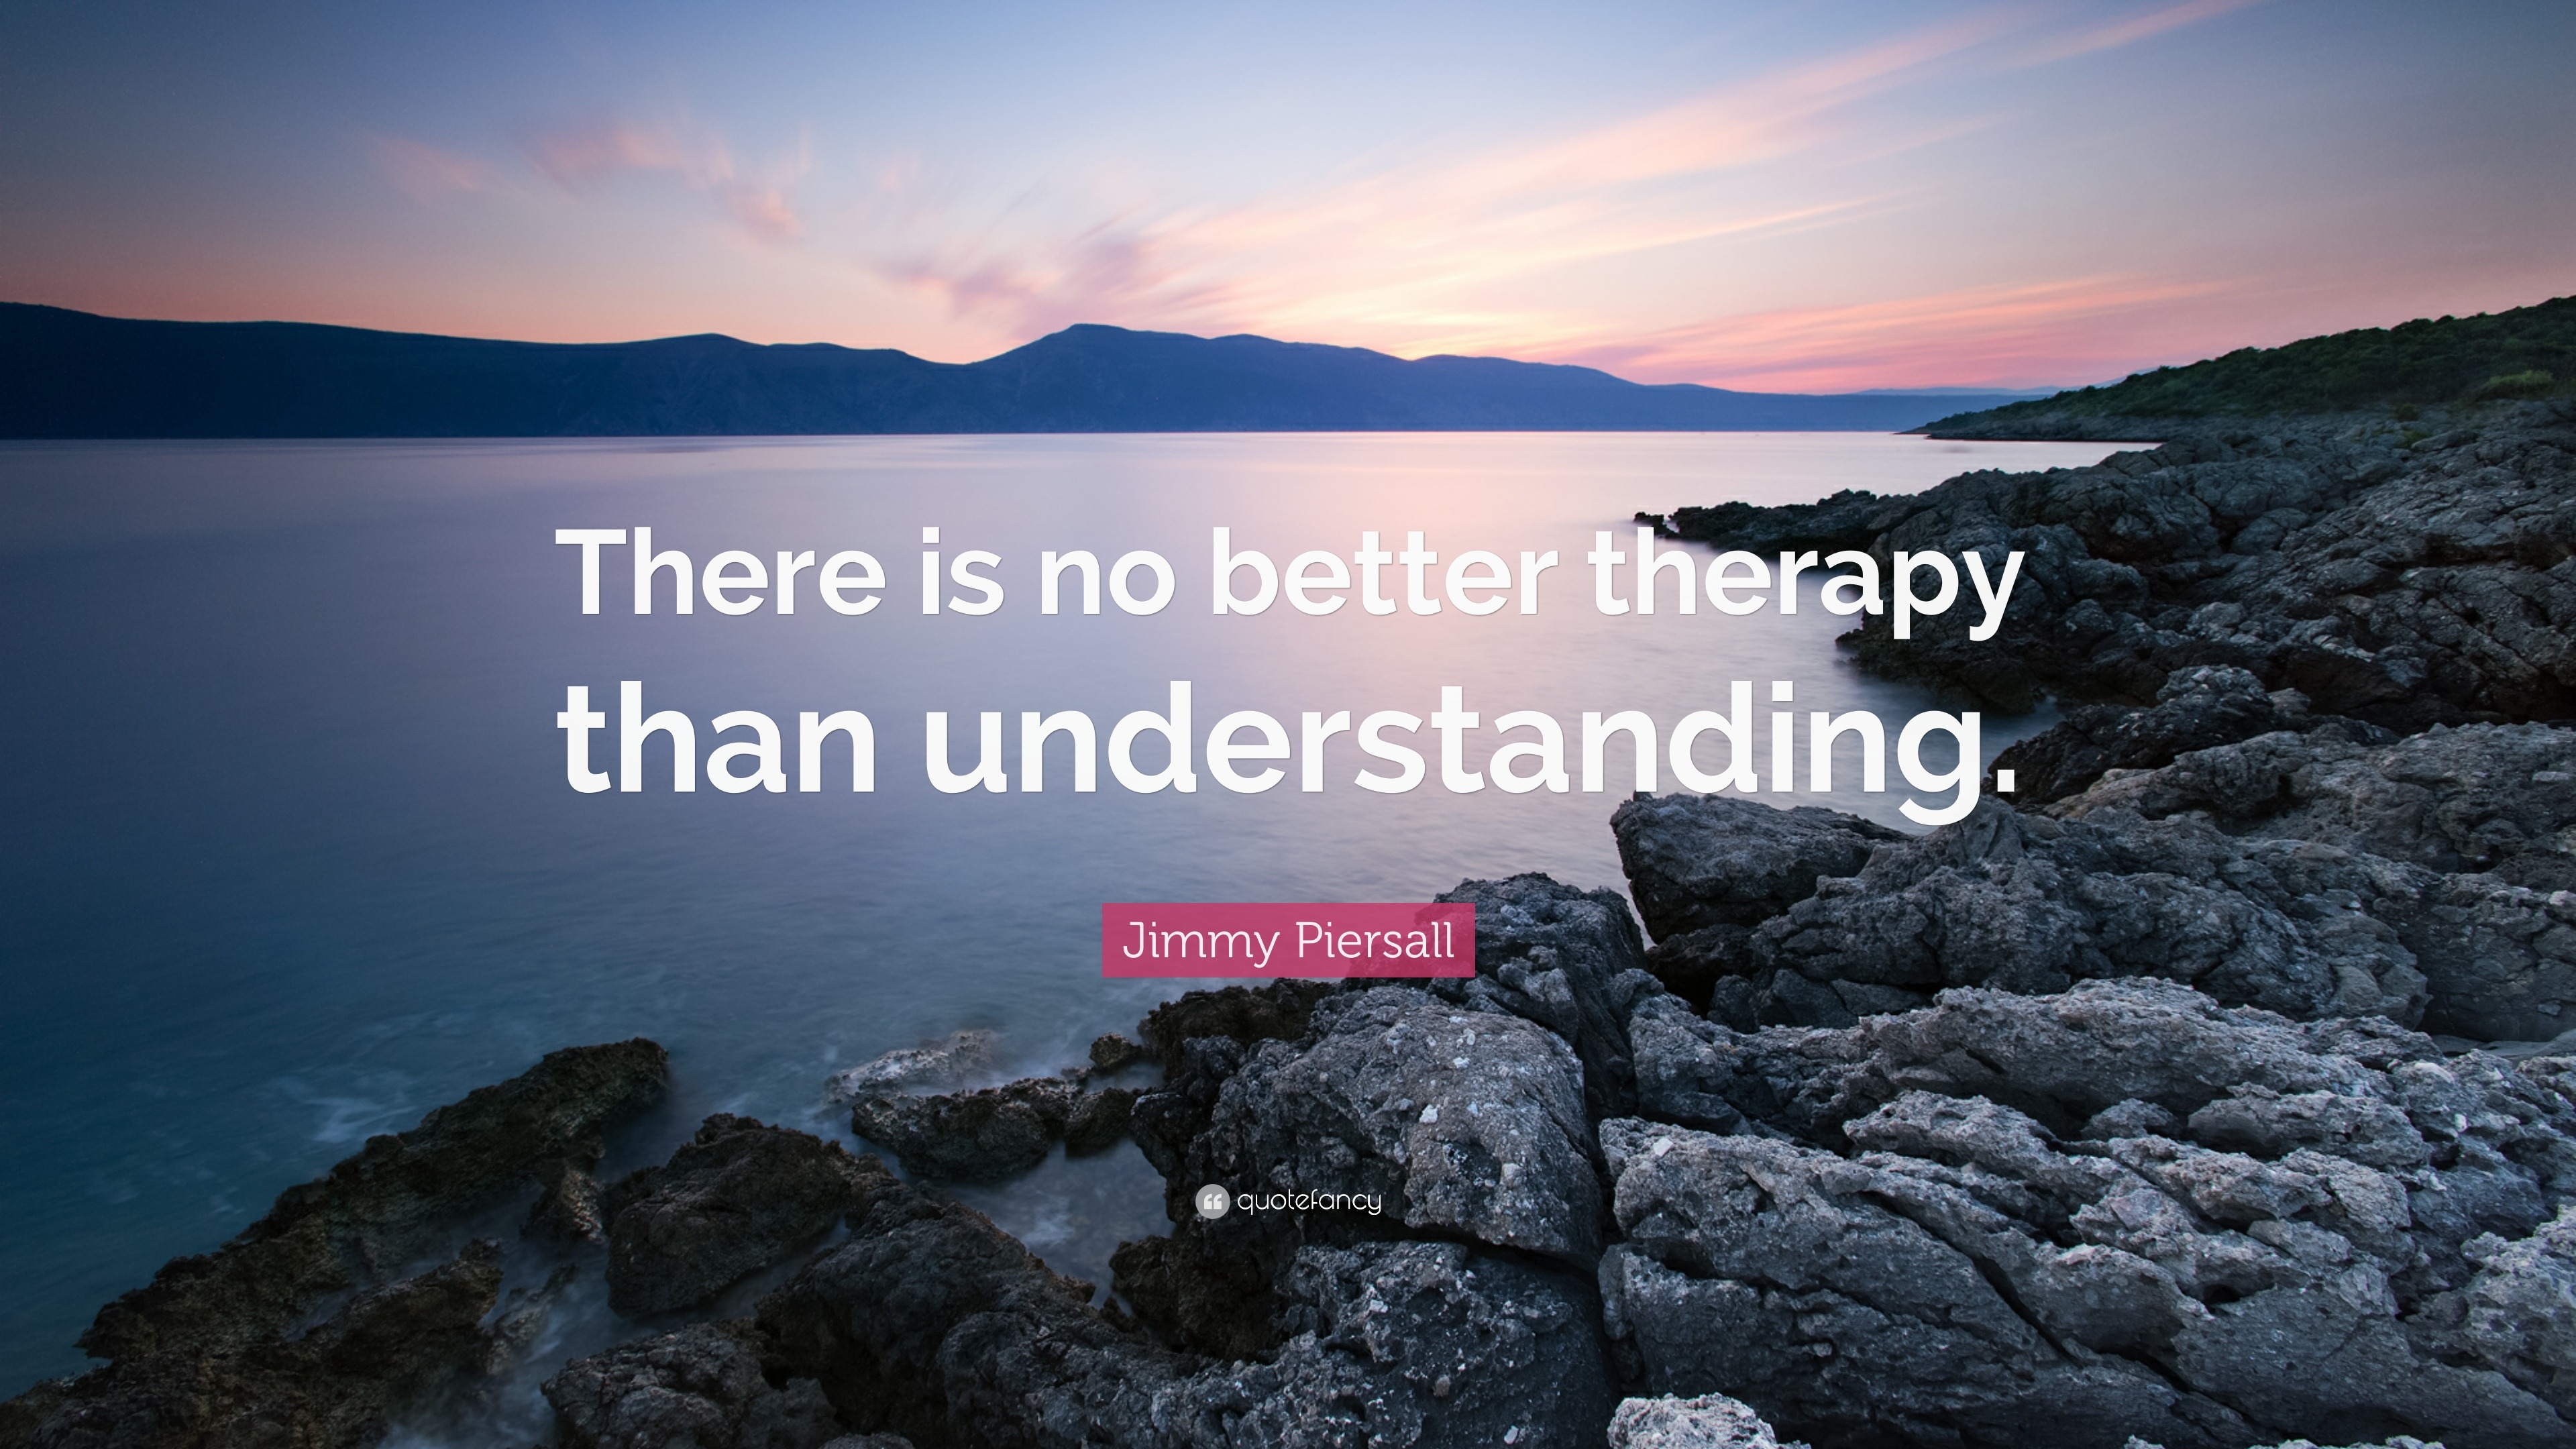 Jimmy Piersall Quote: “There is no better therapy than understanding.”